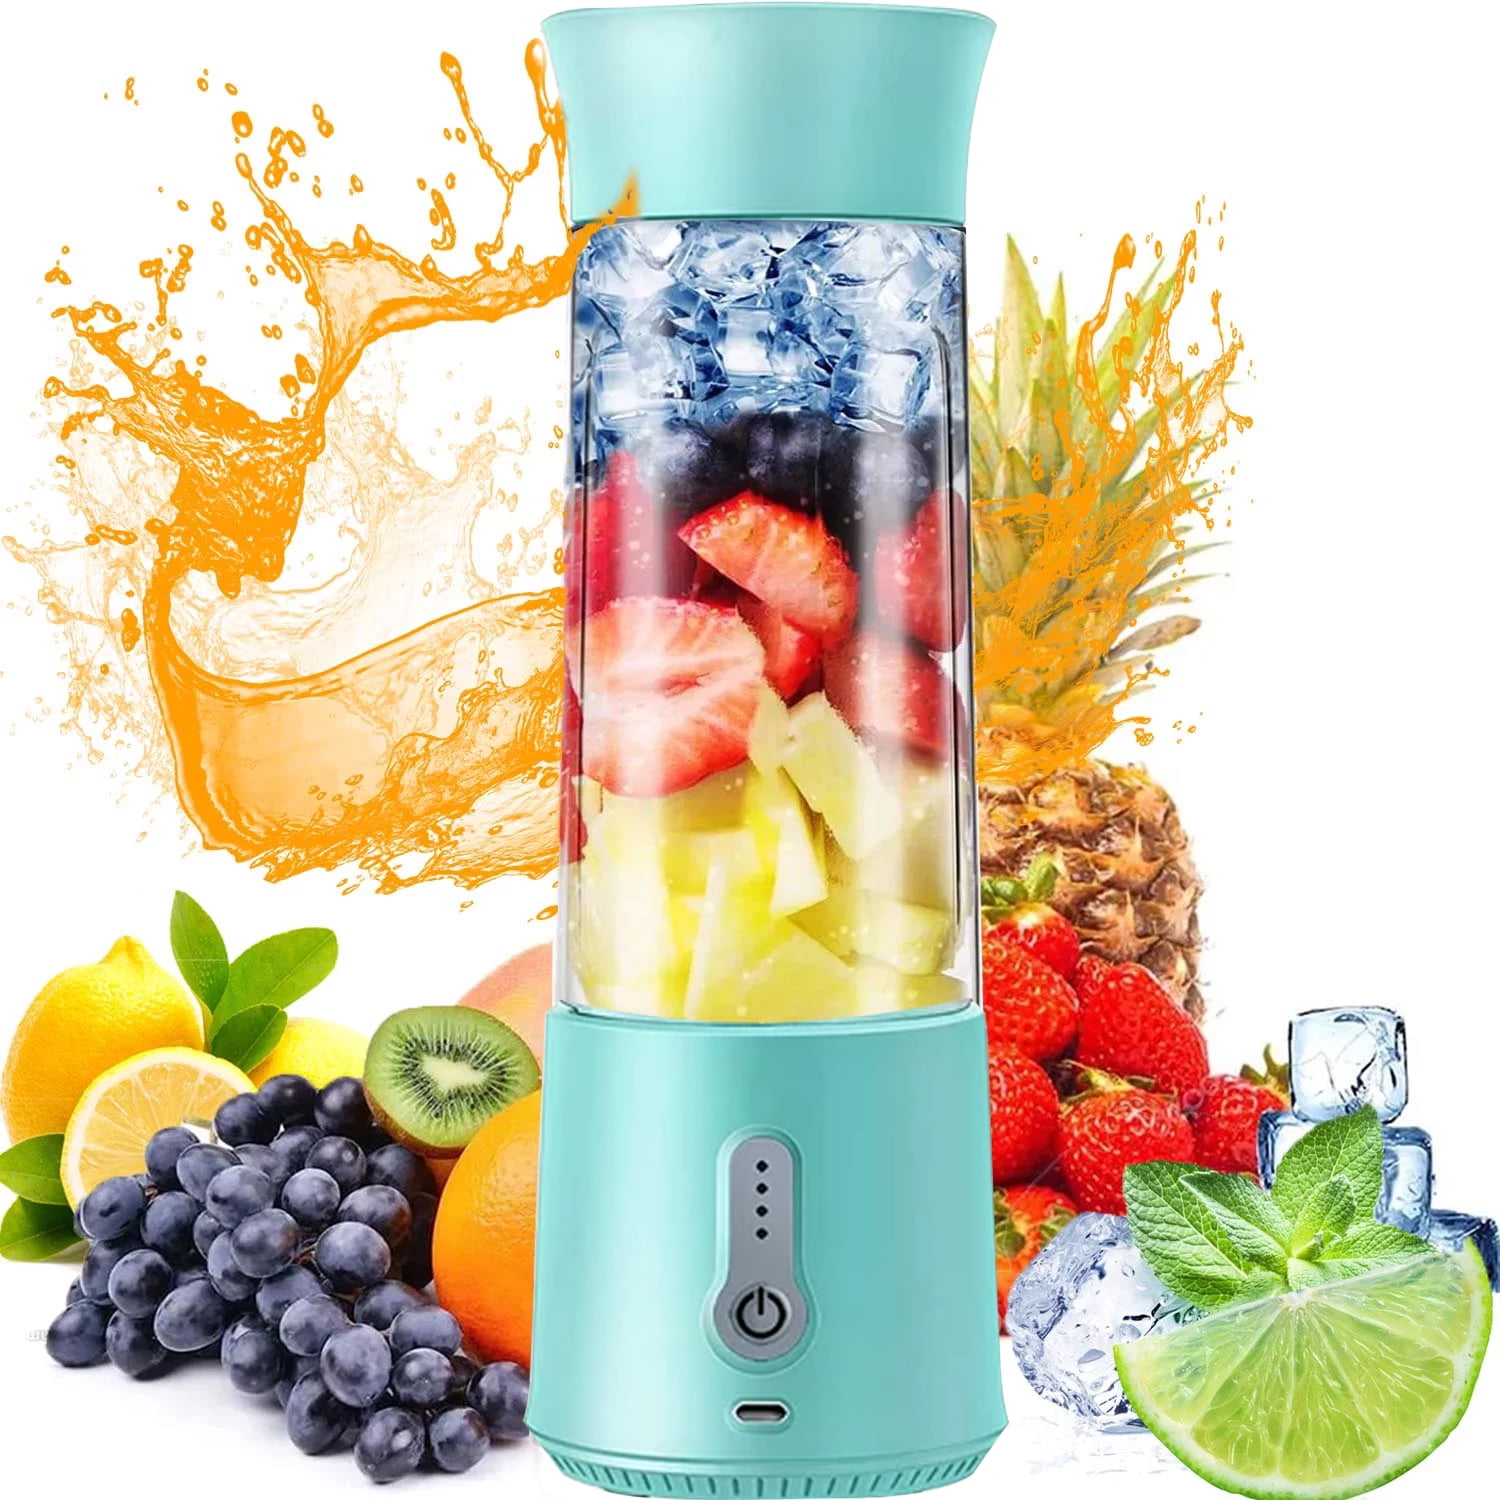 500ml USB Rechargeable Portable Juicer - Compact And Convenient